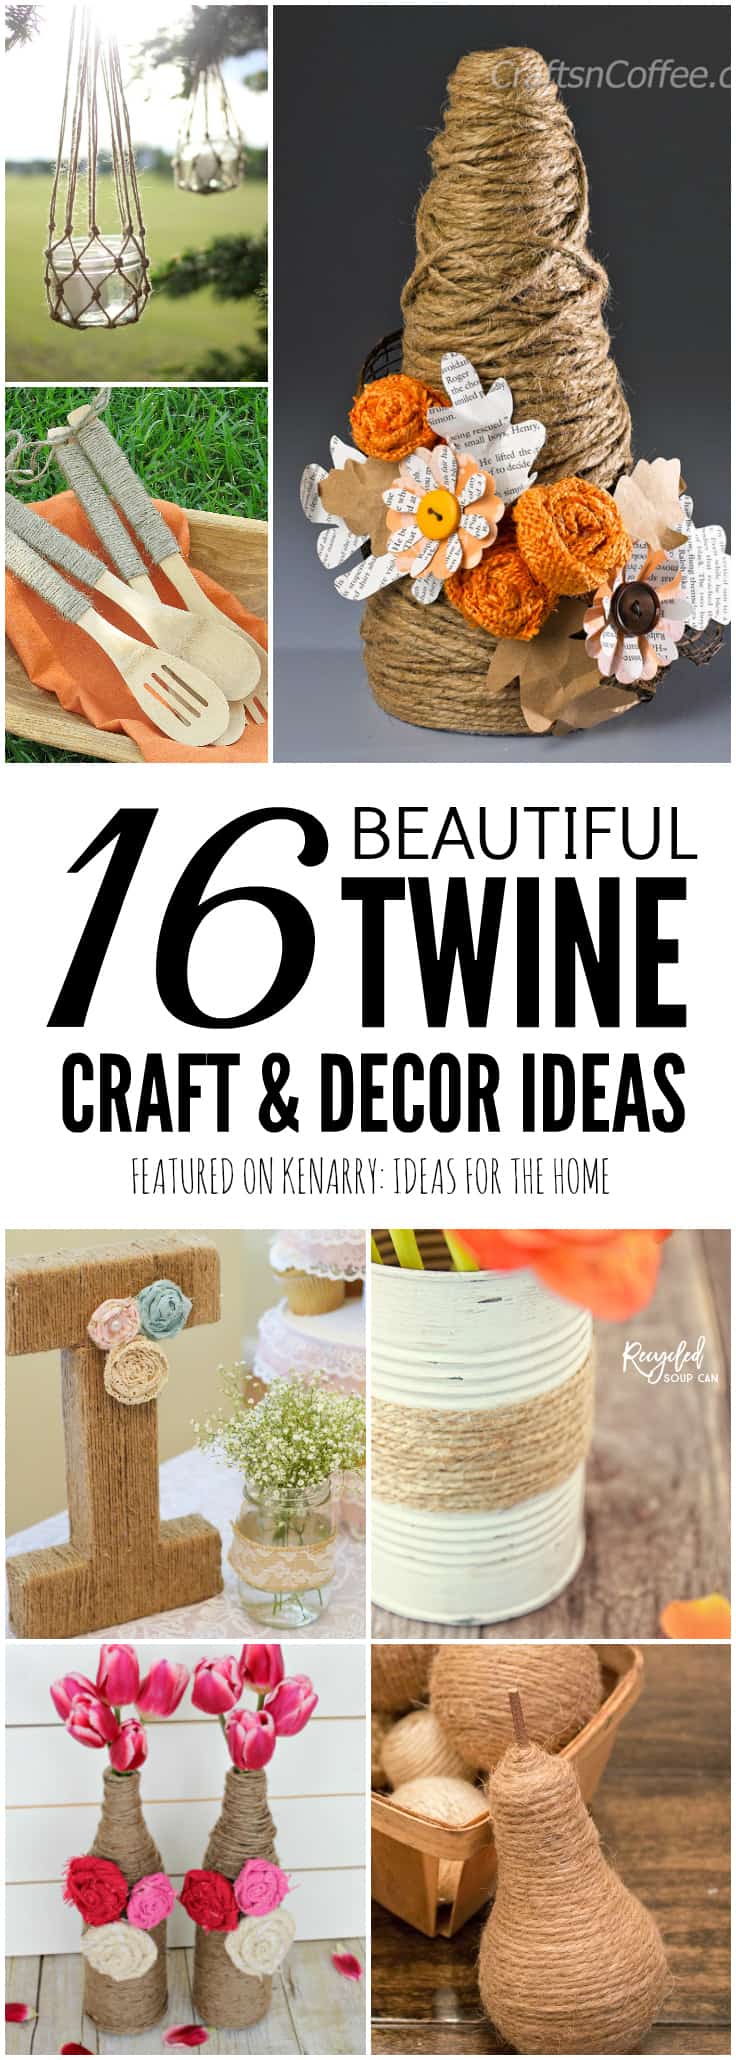 This collection of beautiful jute craft ideas includes 16 DIY projects you can make with burlap twine. If you love farmhouse style decor, you've got to check out these fun crafts.